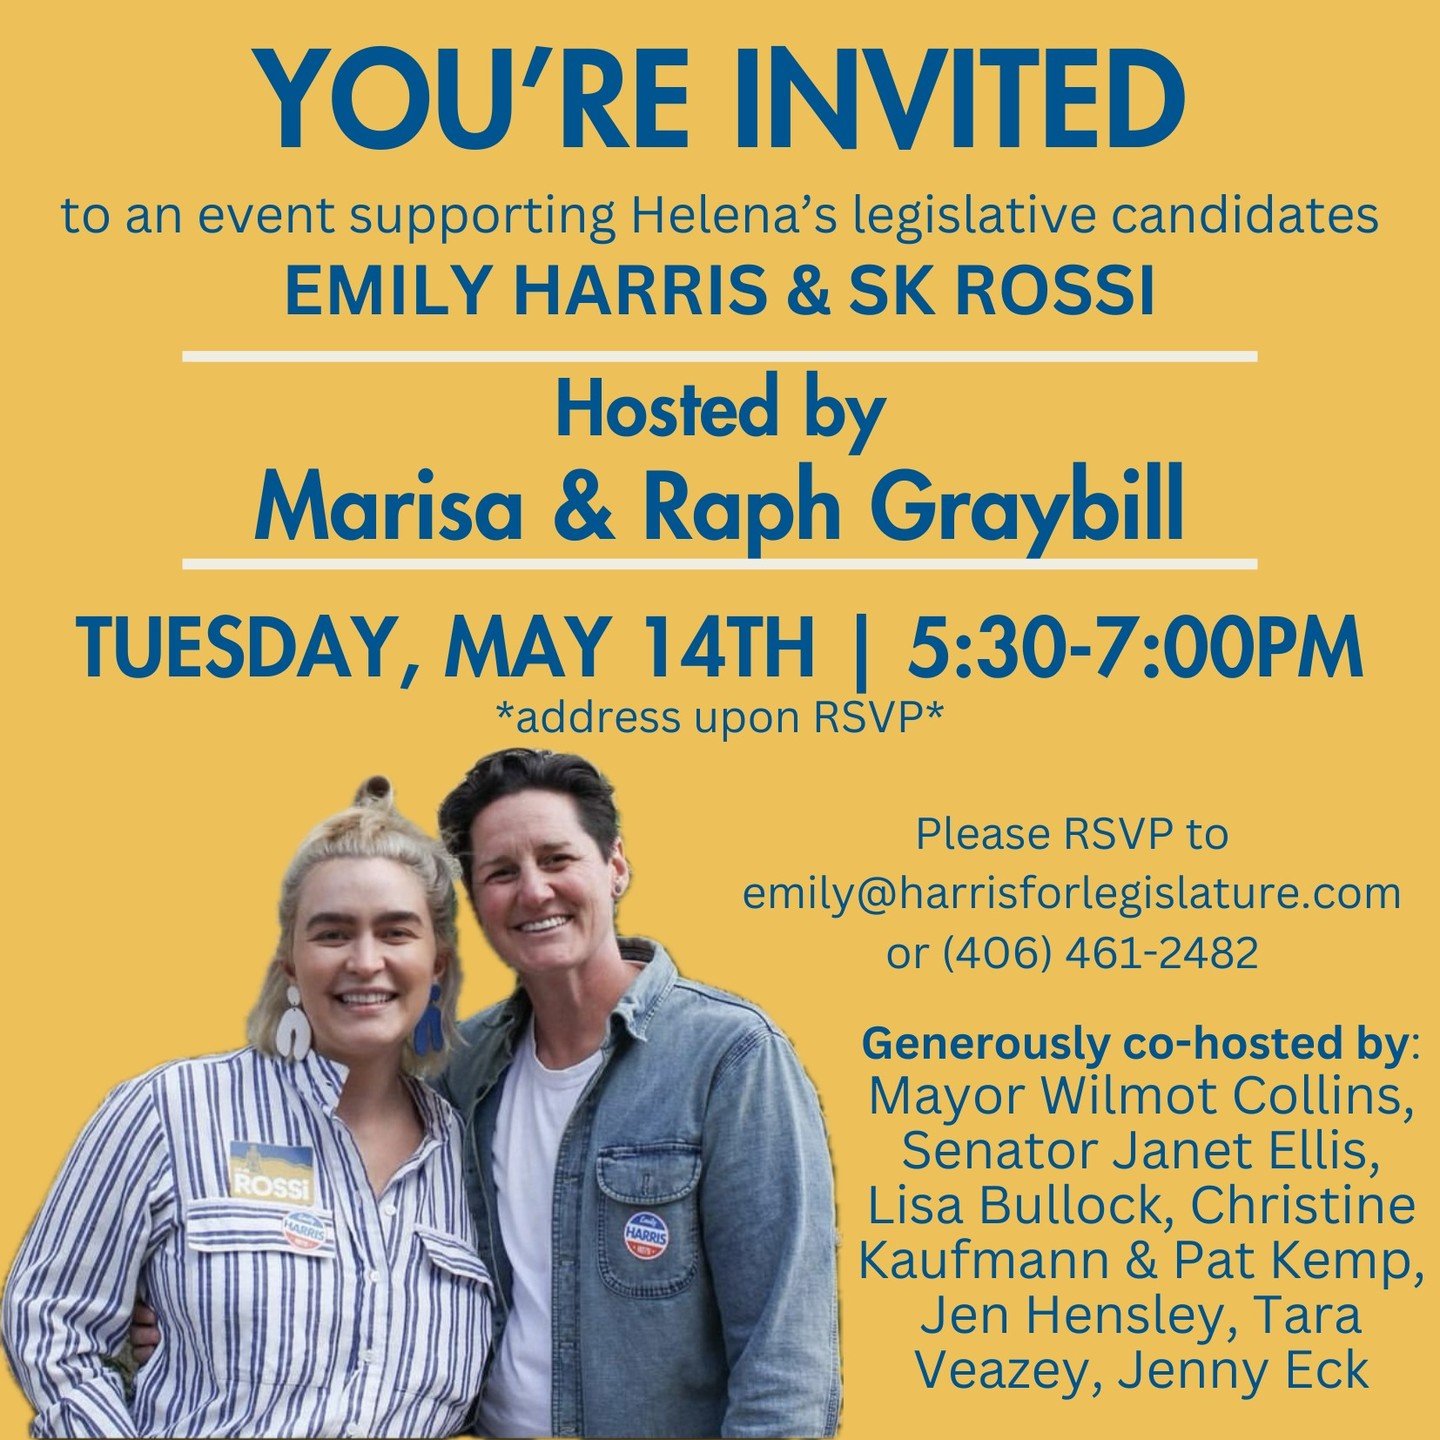 Our dear friends, Marisa &amp; Raph Graybill, are hosting a little shindig for us! Please join Rossi &amp; me as we celebrate the upcoming primary election, sign up GOTV volunteers, and raise last minute funds to help us pay our bills! 

Hope to see 